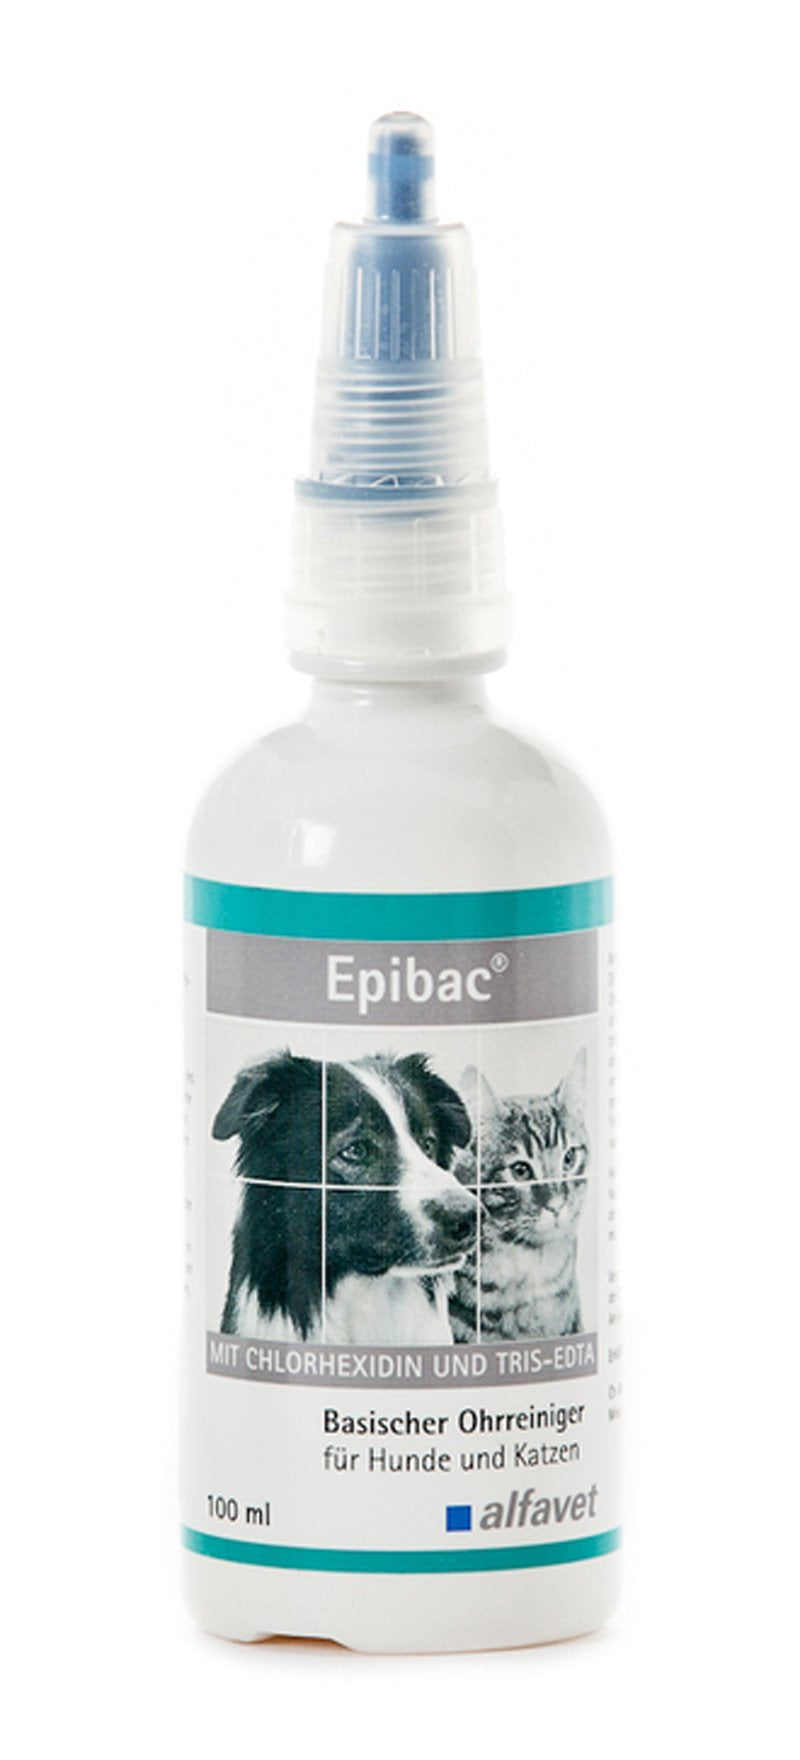 Epibac Basic ear cleaner with chlorhexidine and Tris-EDTA, 100 ml - particularly suitable for cleaning ears before using antibiotics - PawsPlanet Australia